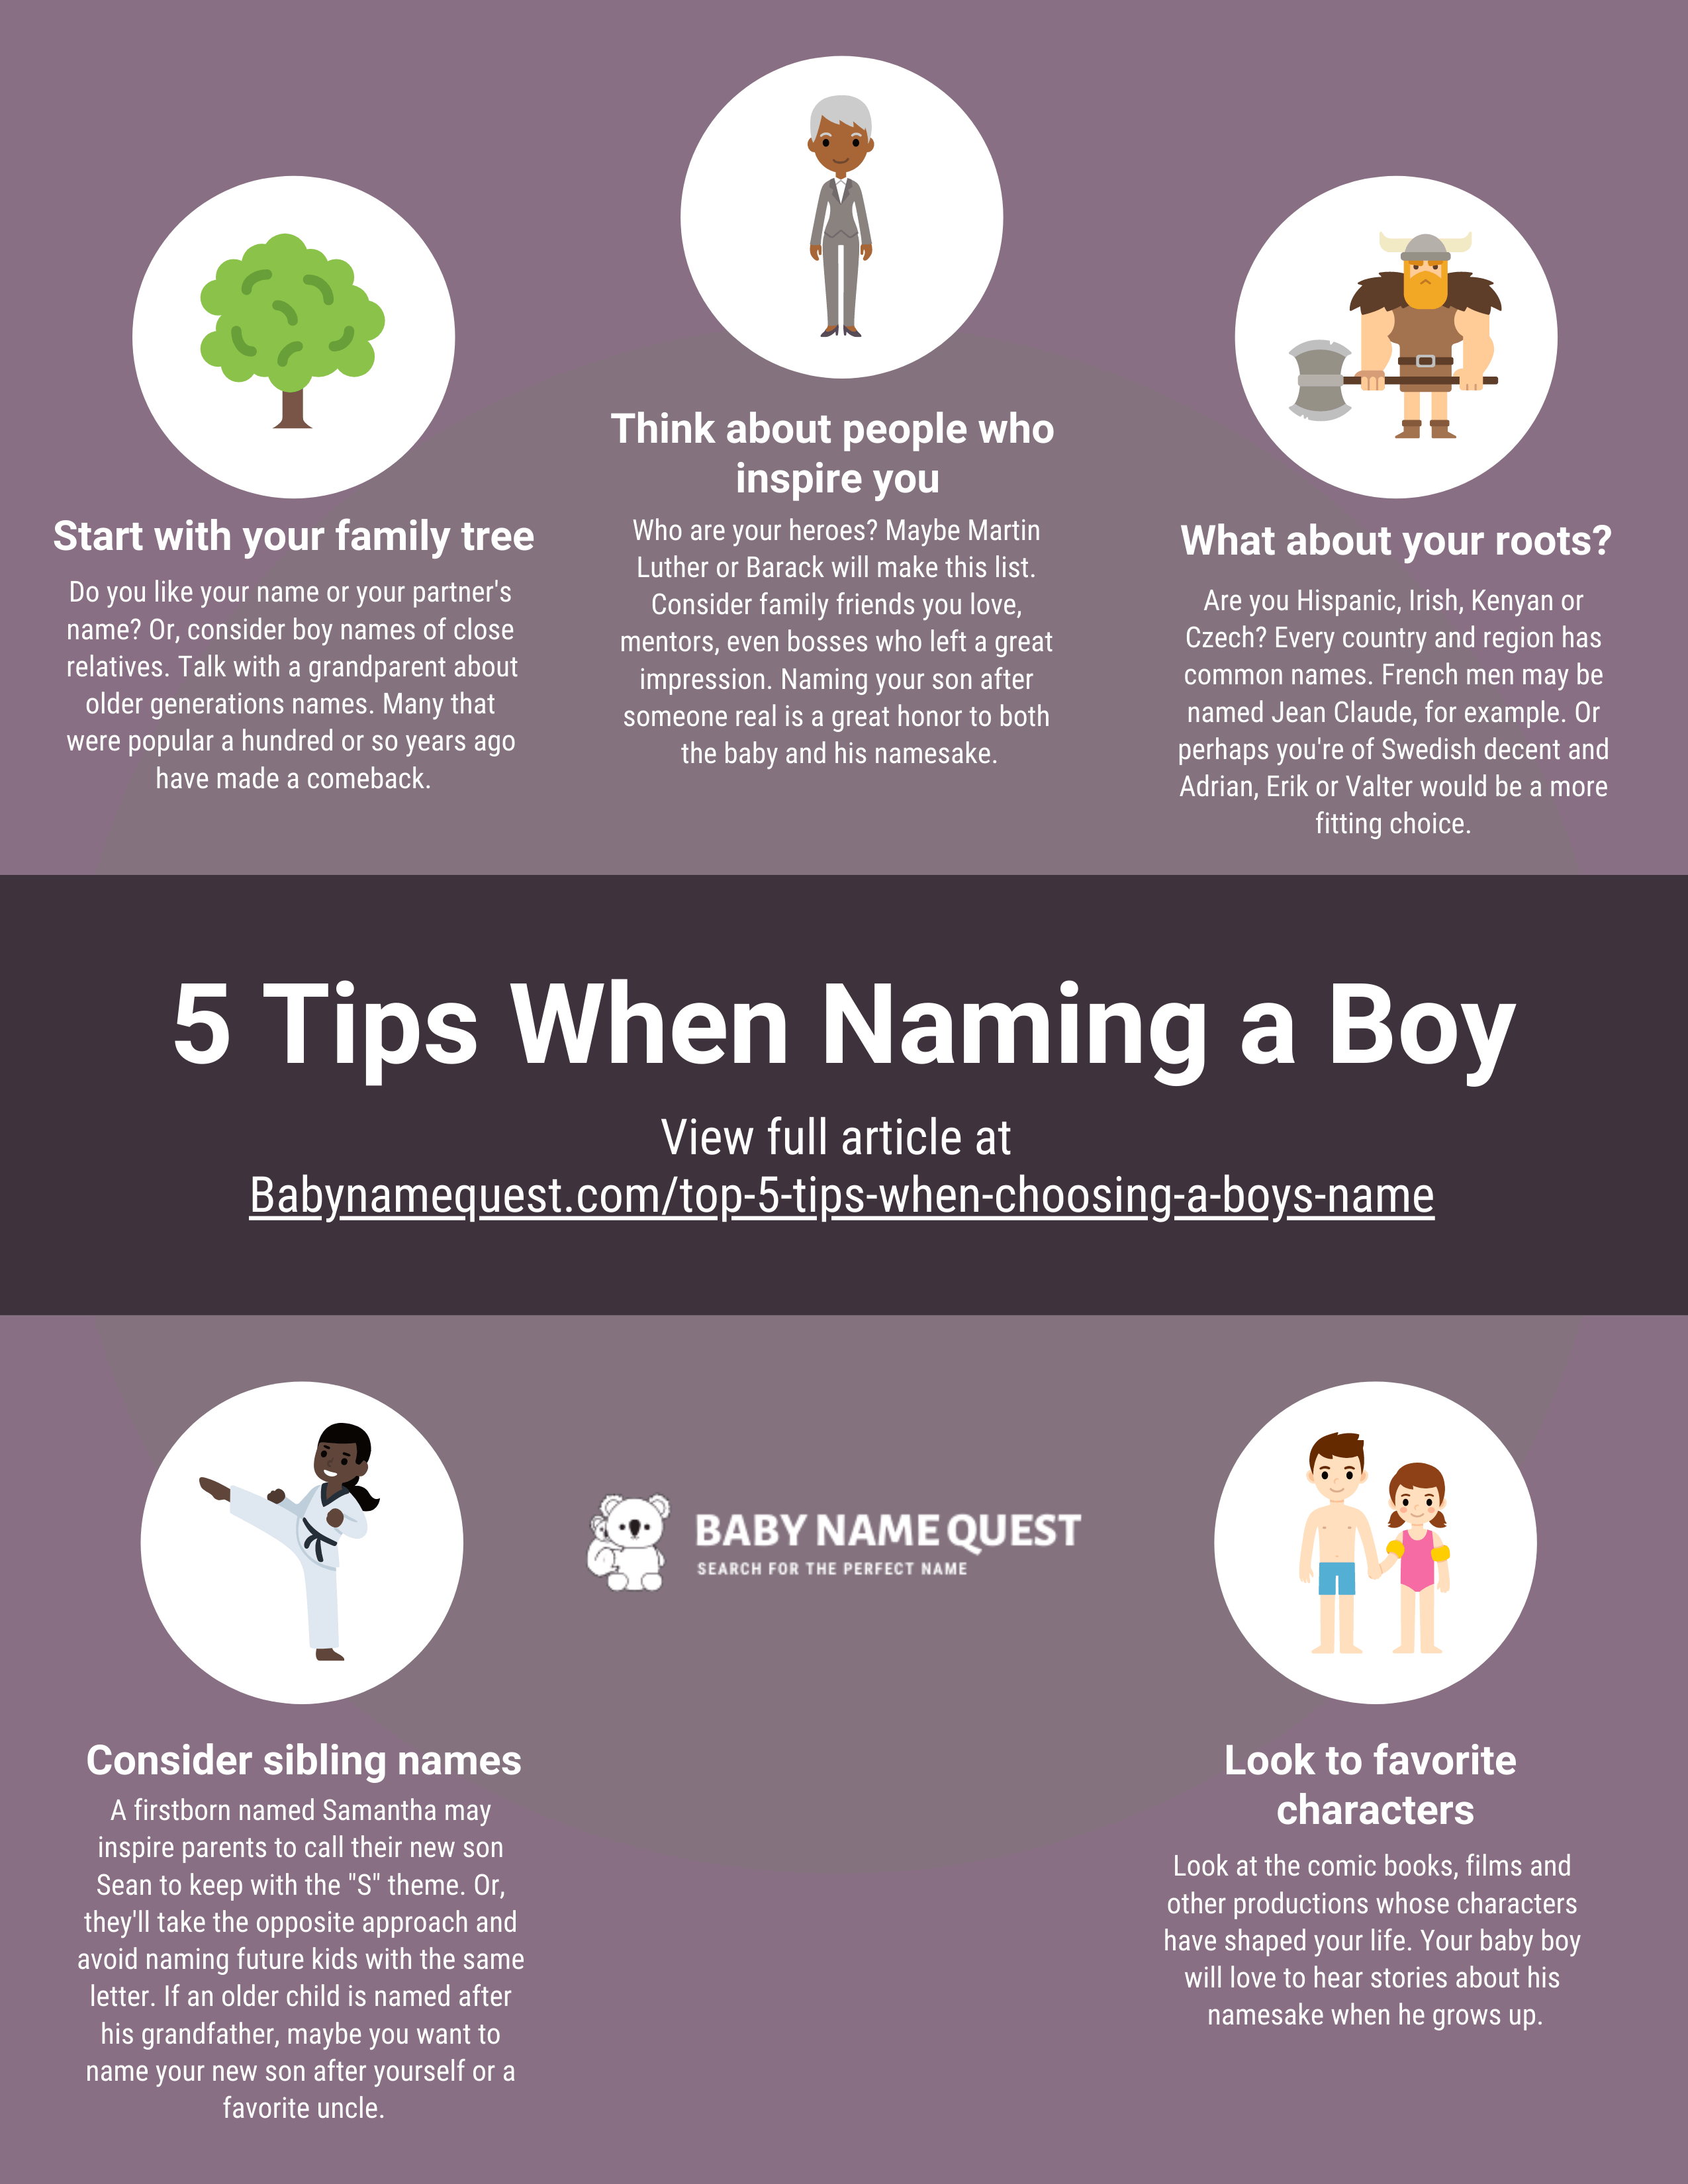 5 Tips For Naming a Boy Infographic